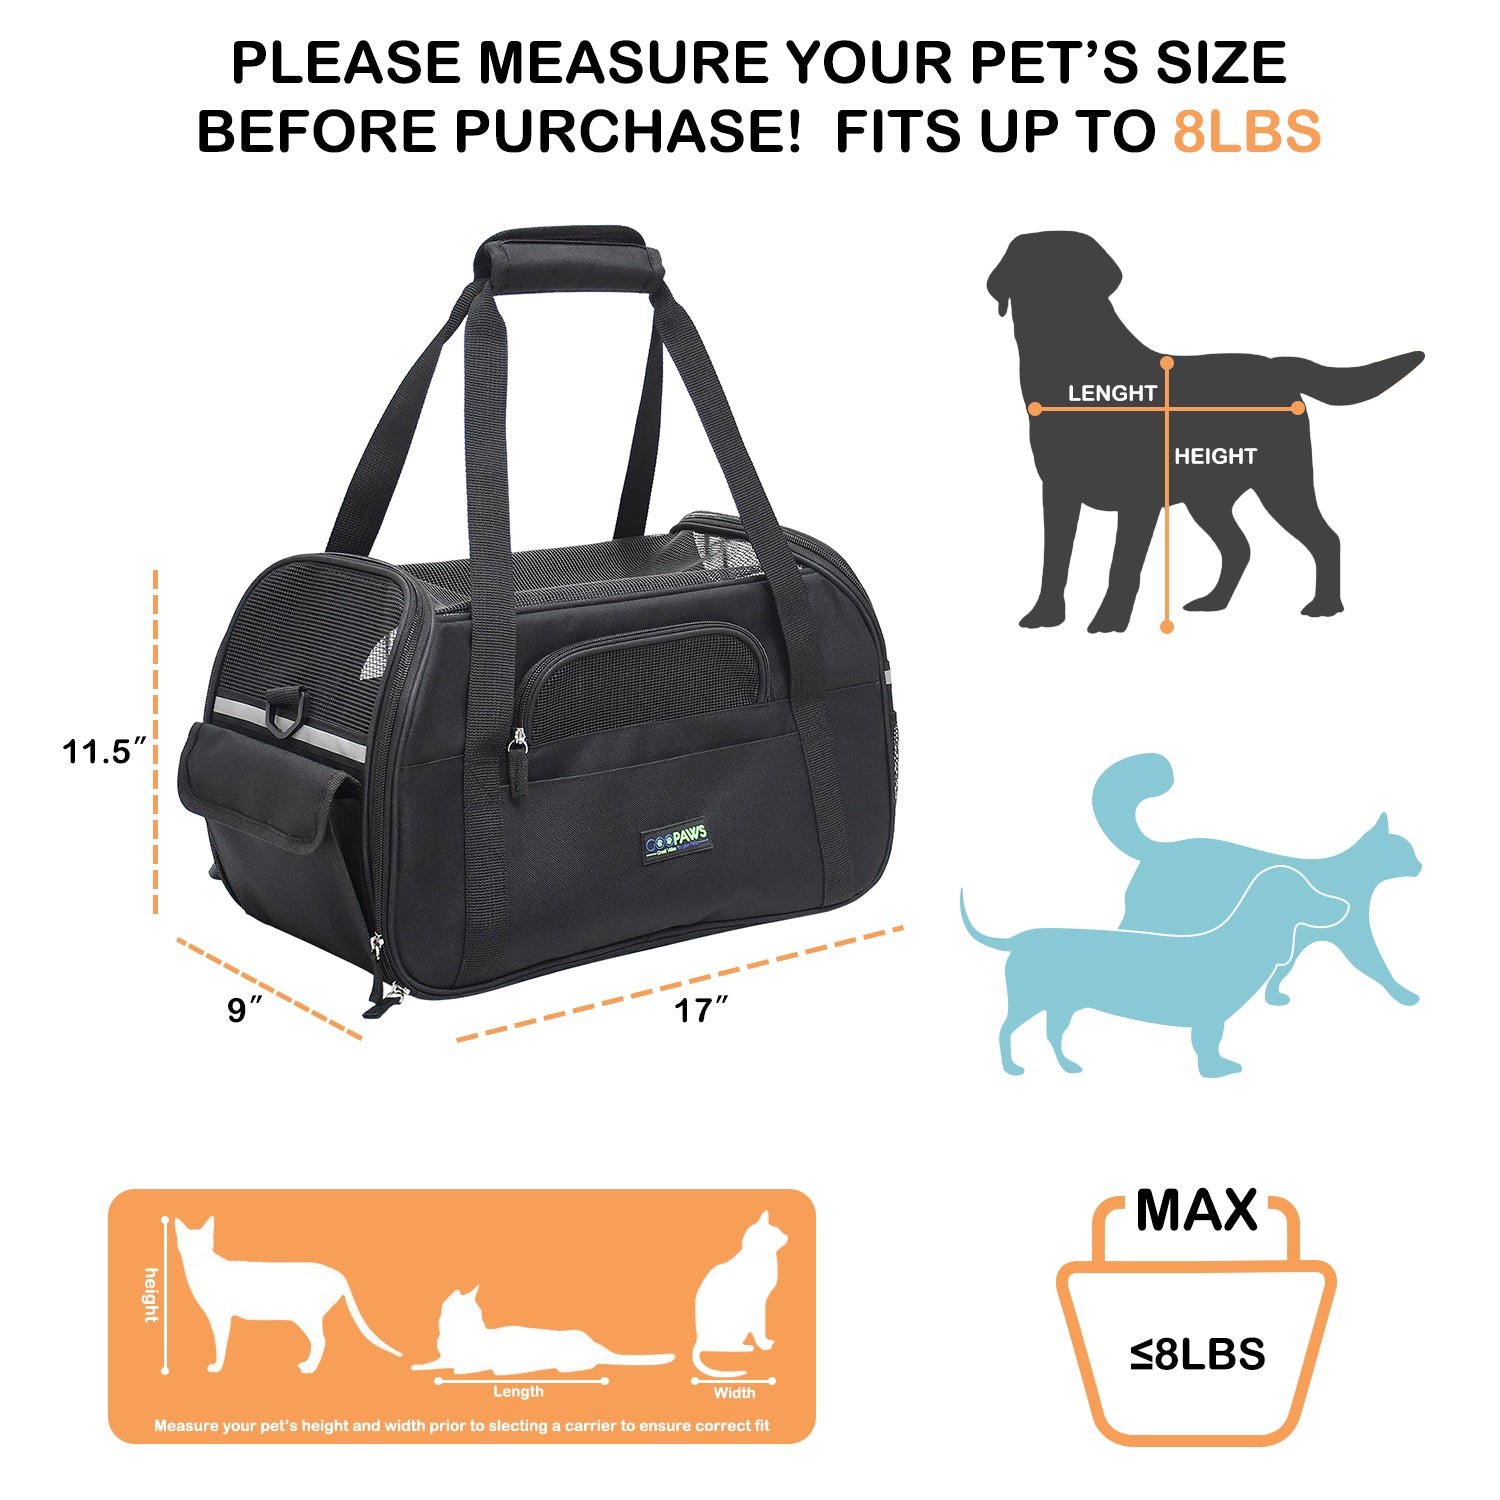 GOOPAWS Soft Sided Small Pet Carrier Comfort for Travel, Black, 17"